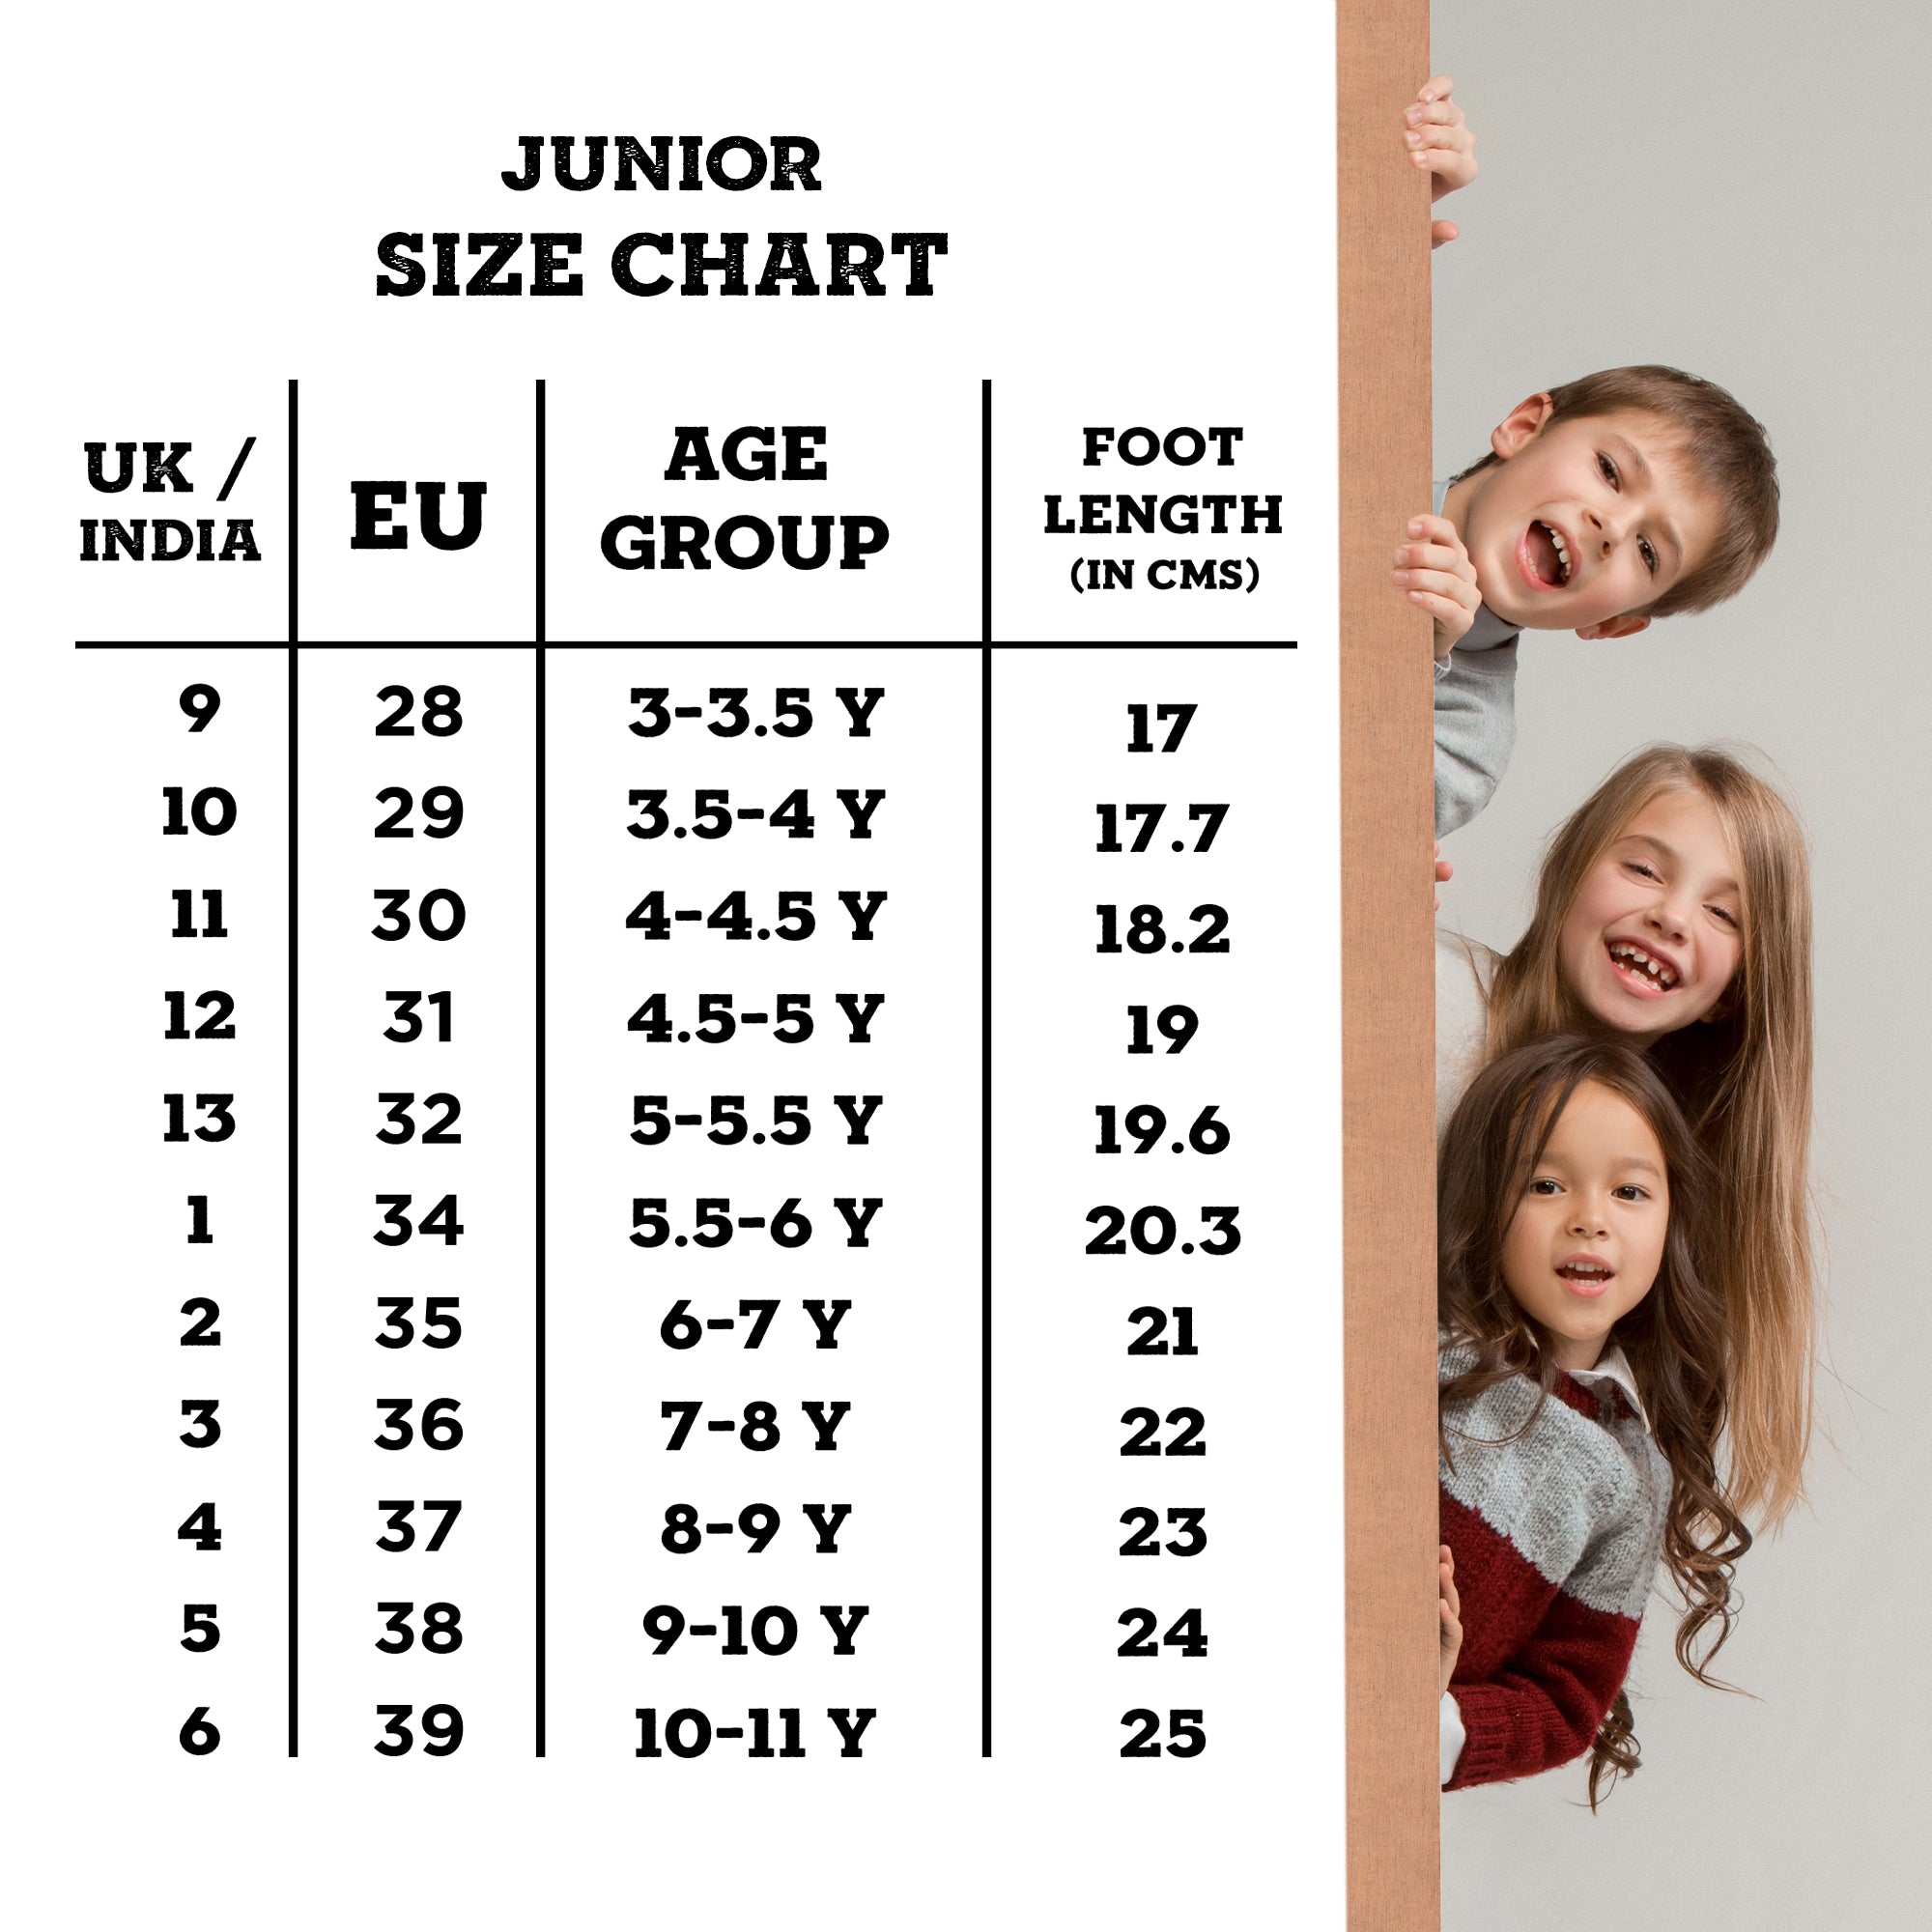 Know Your Size - Flip Flops Measurement Guide - Solethreads